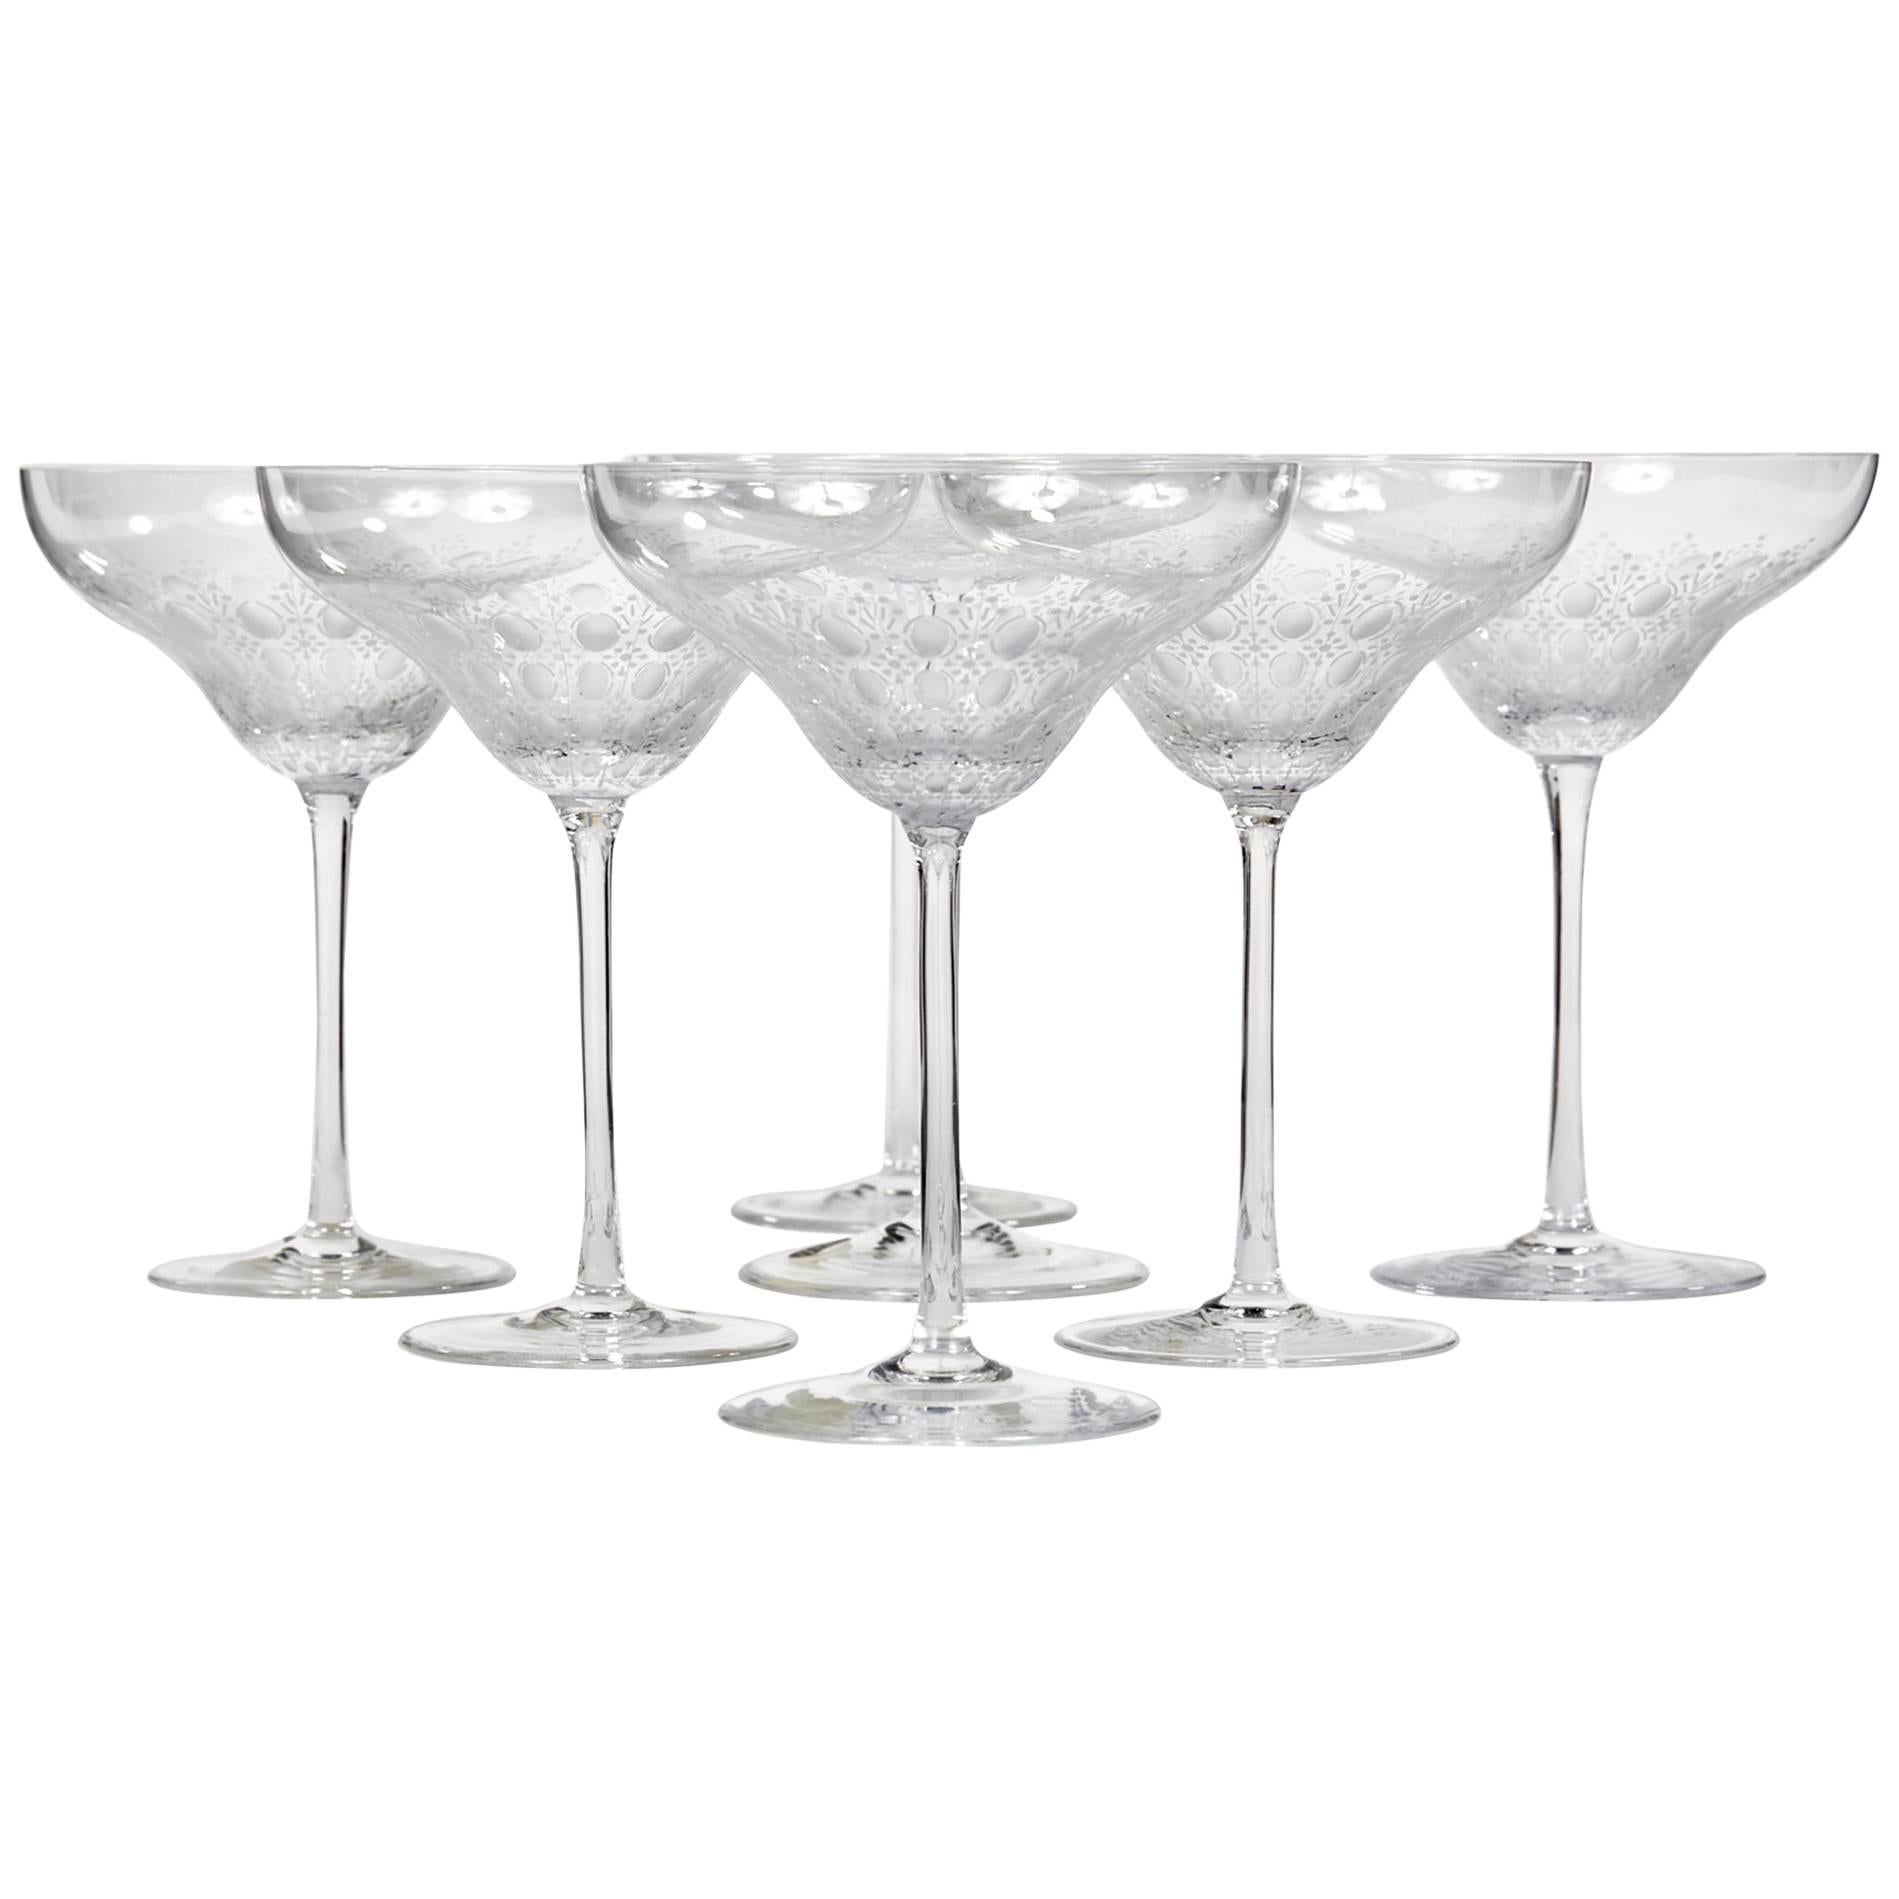 Bjorn Wiinblad for Rosenthal Studio Line Glass Coupes, 1960s For Sale